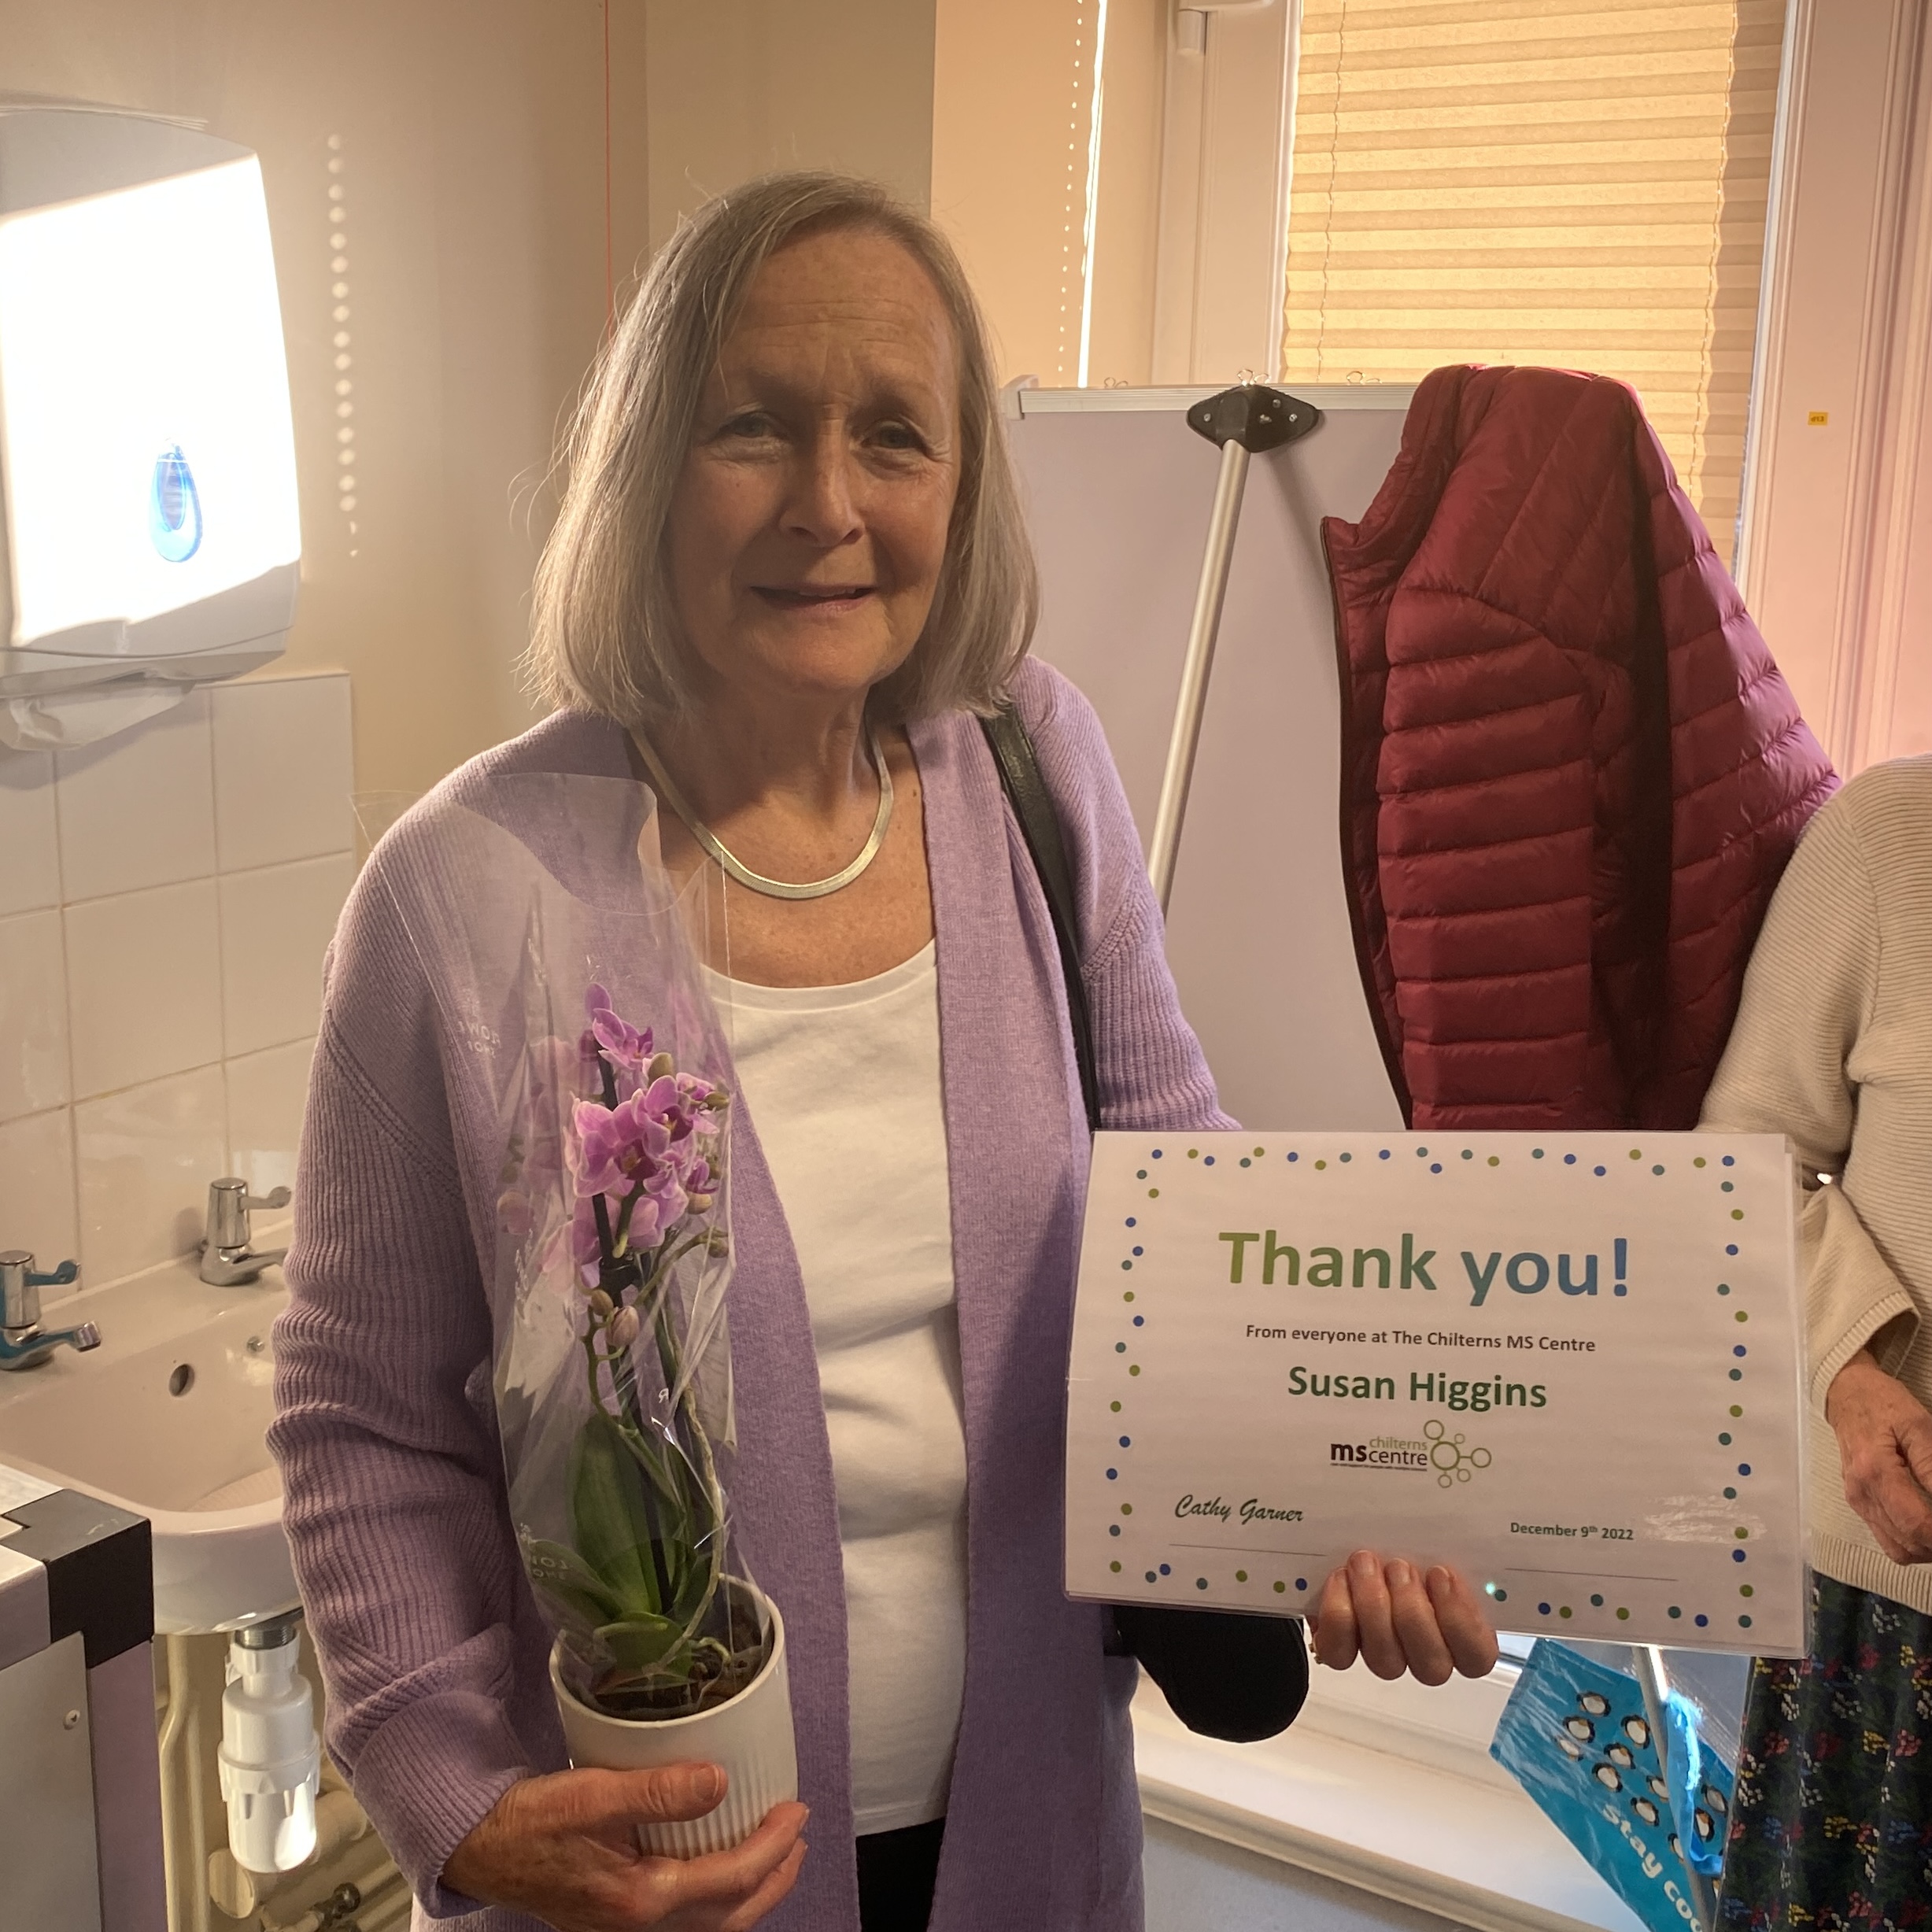 Smiling lady holding up a certificate saying thank you in one hand and a flower in the other.